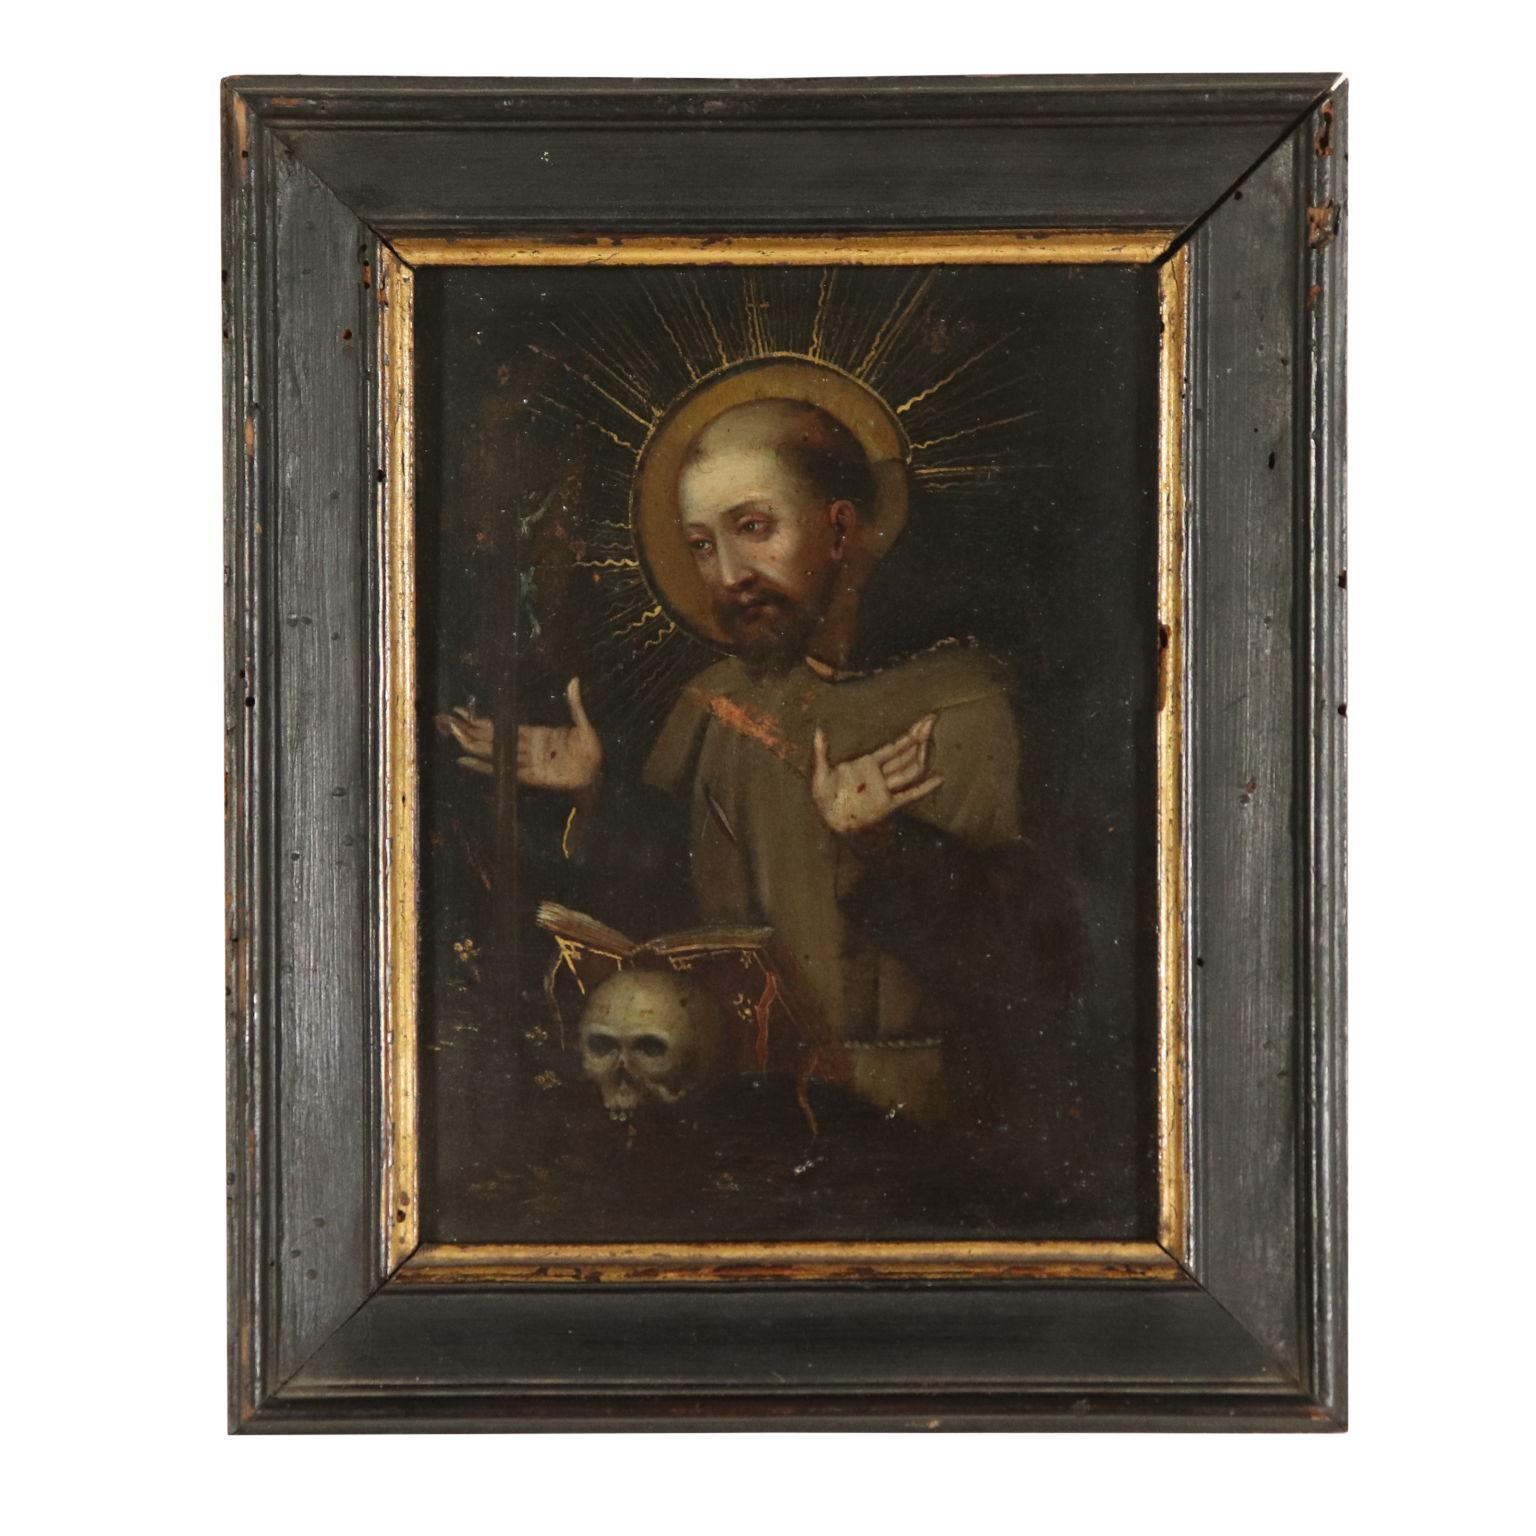 Unknown Portrait Painting - St. Francis Worshiping the Crucifix Oil on Copper Late 1500s